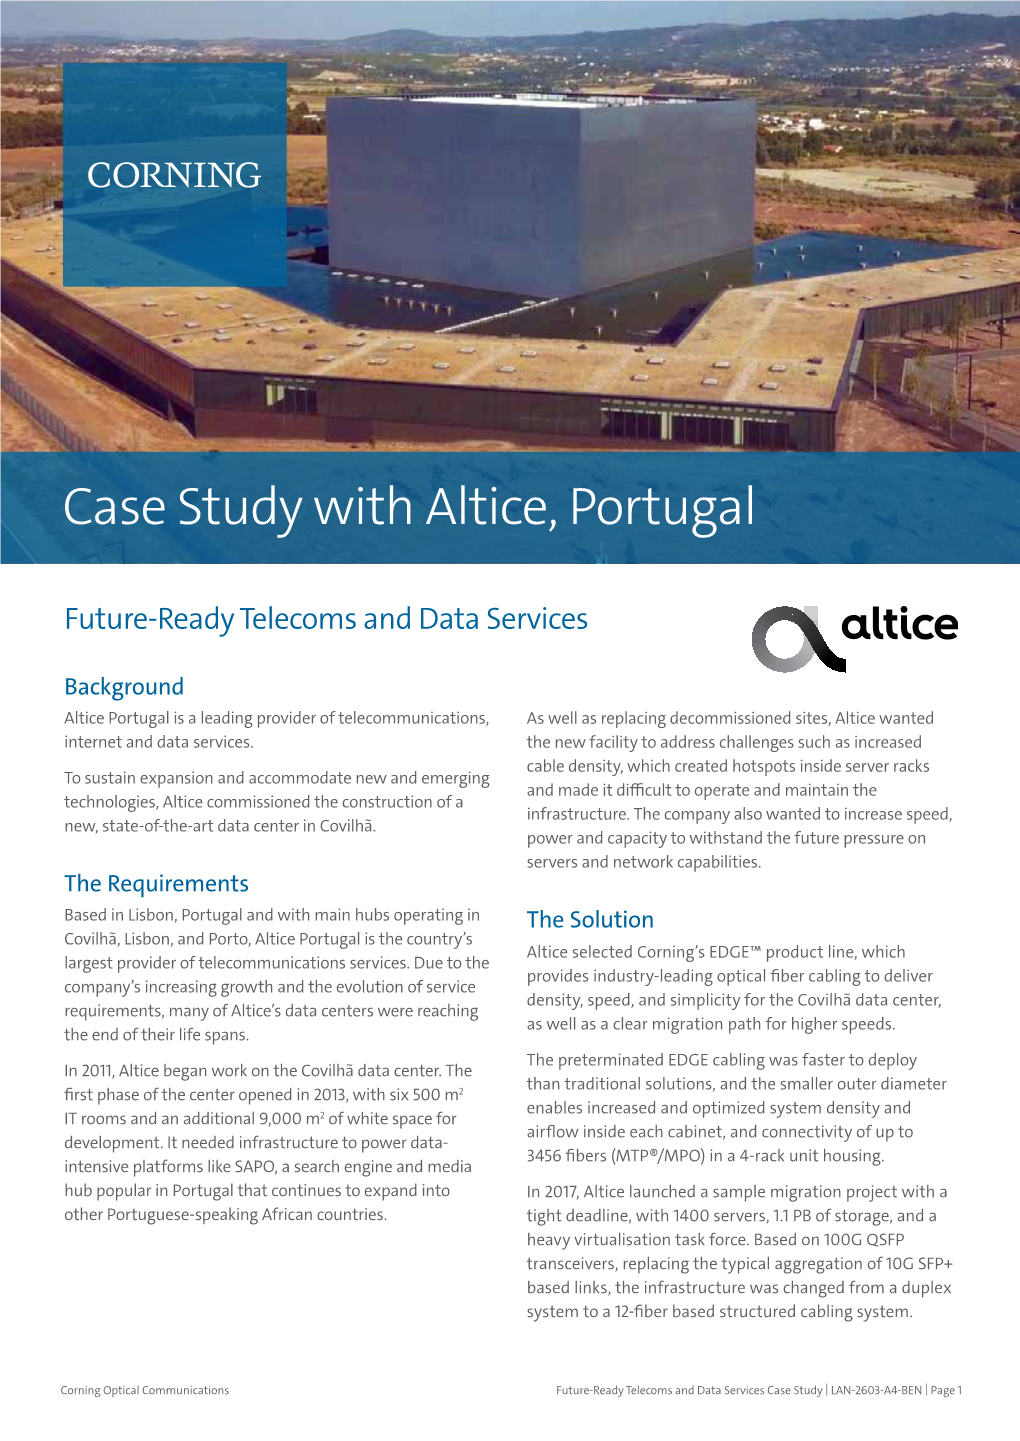 Case Study with Altice, Portugal (Pdf)